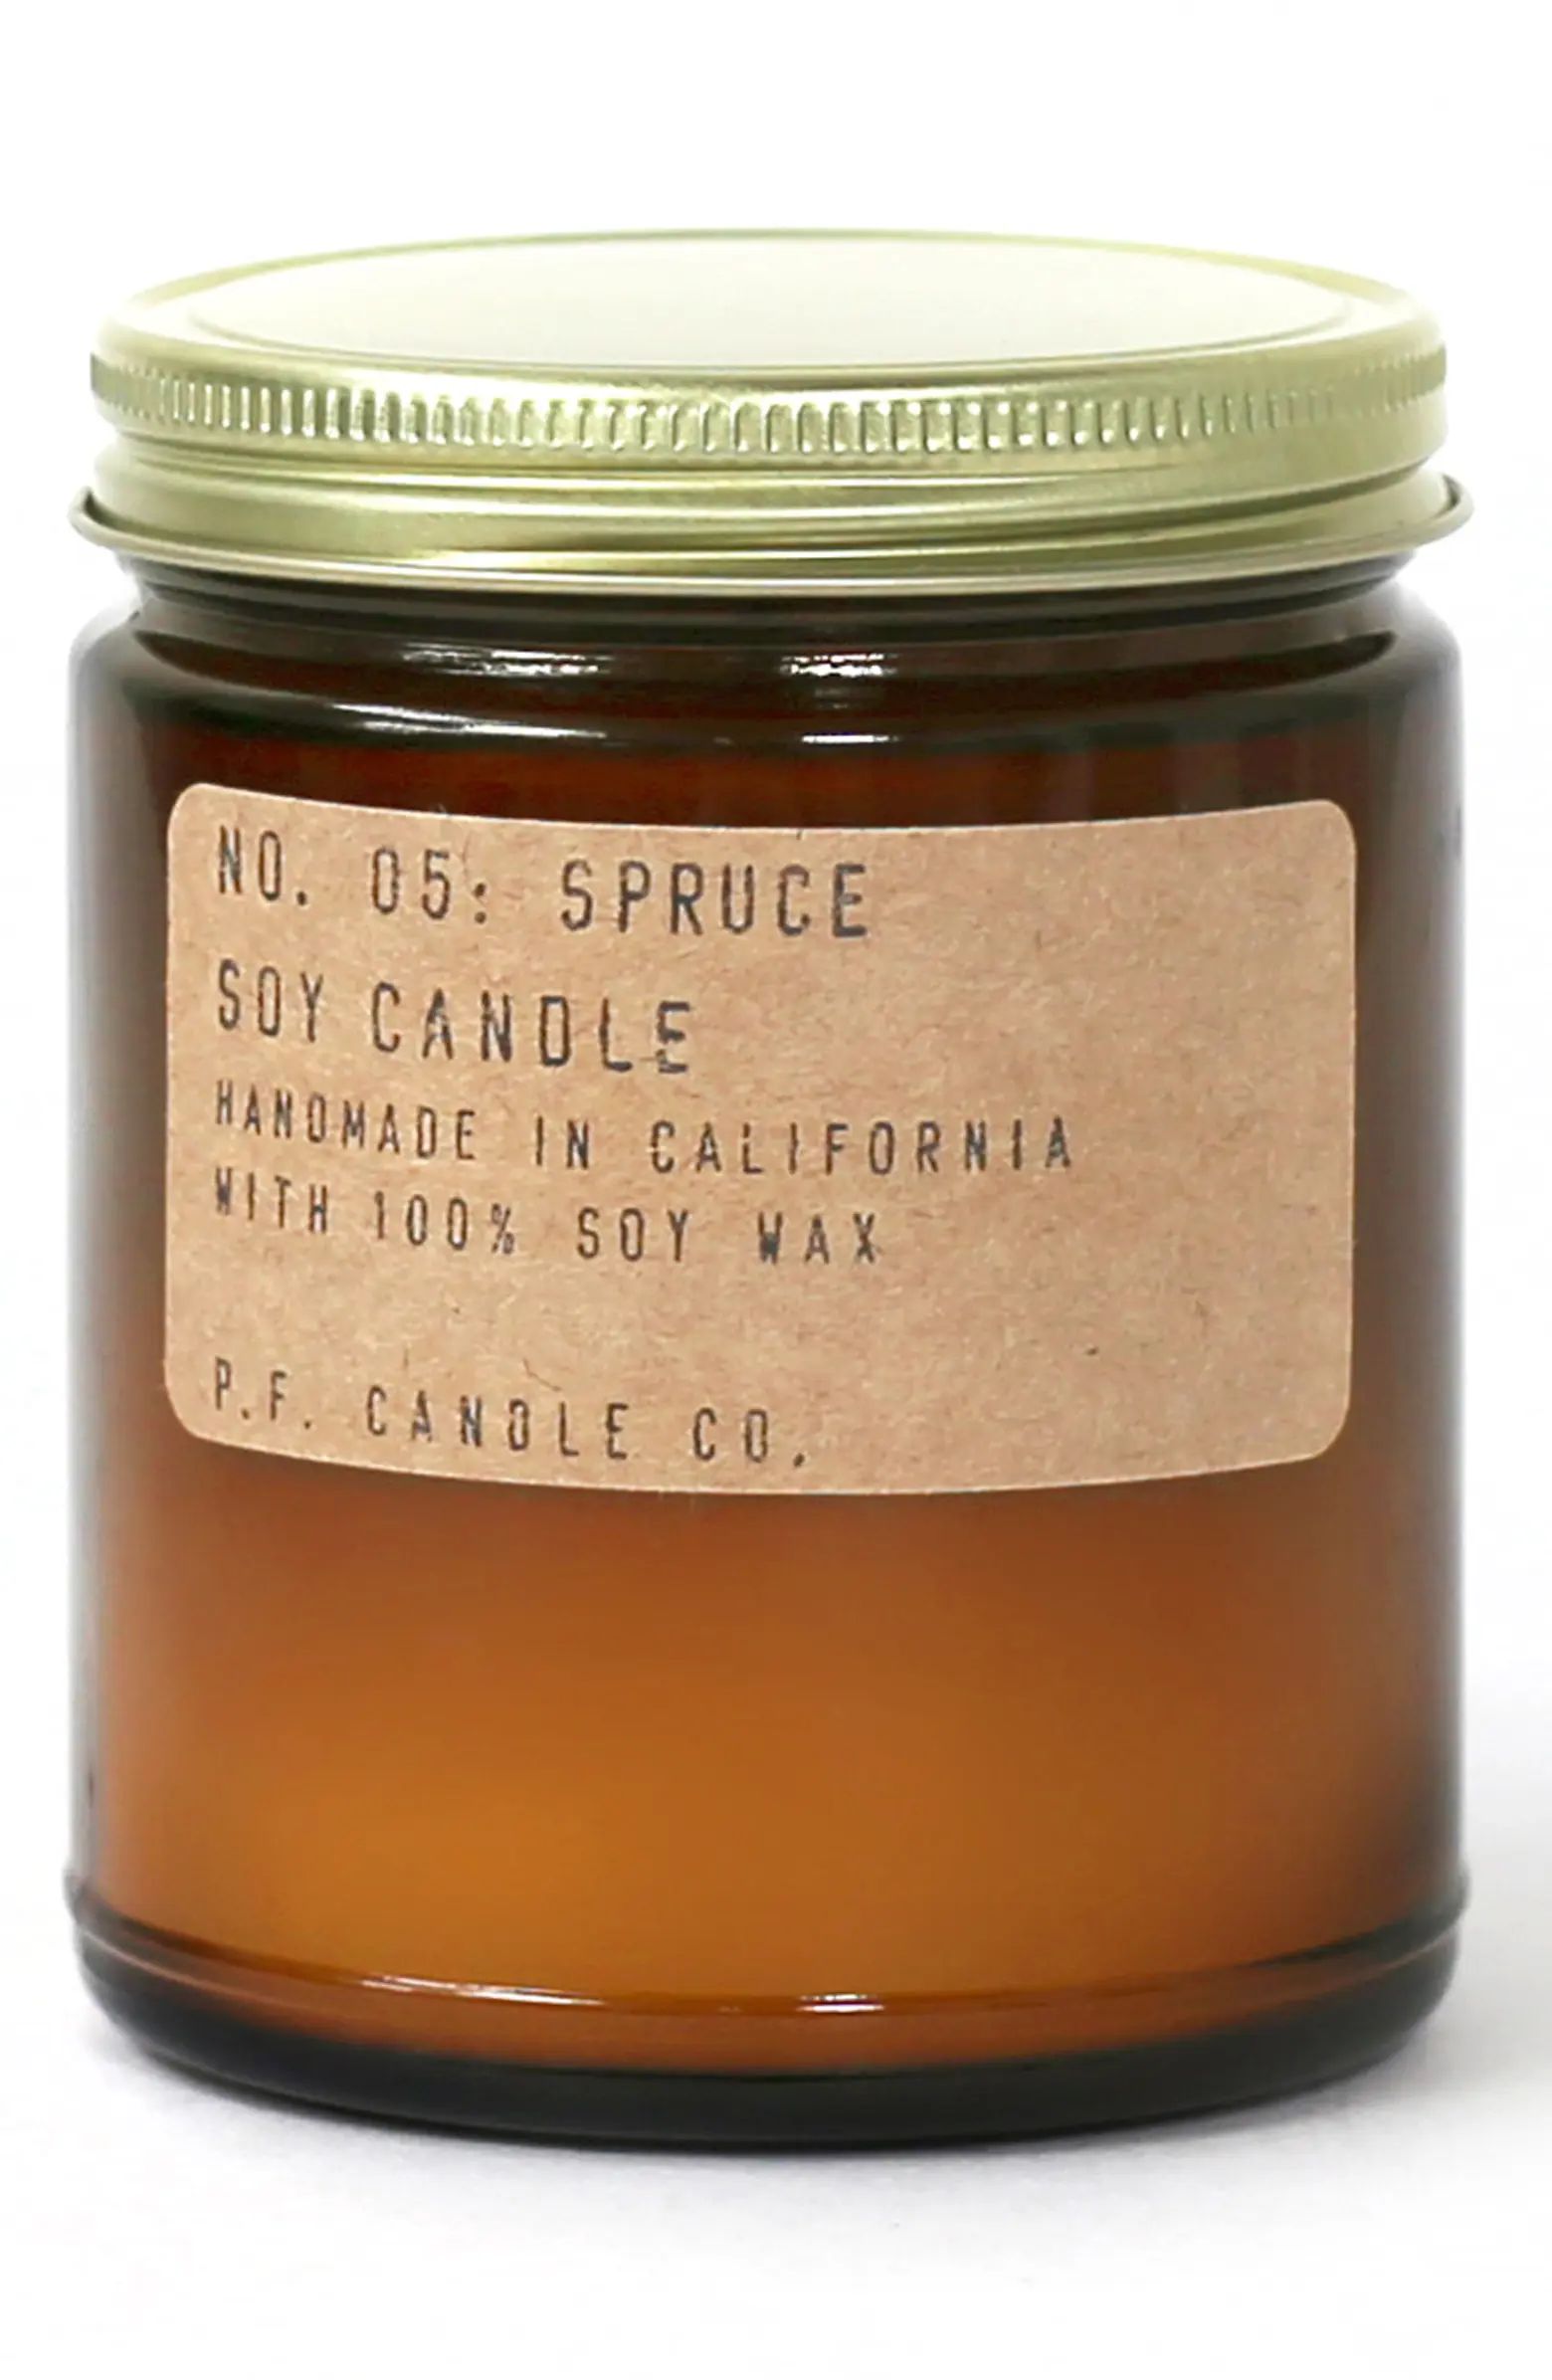 P.F. Candle Co. Spruce Soy Candle | Nordstrom | Nordstrom